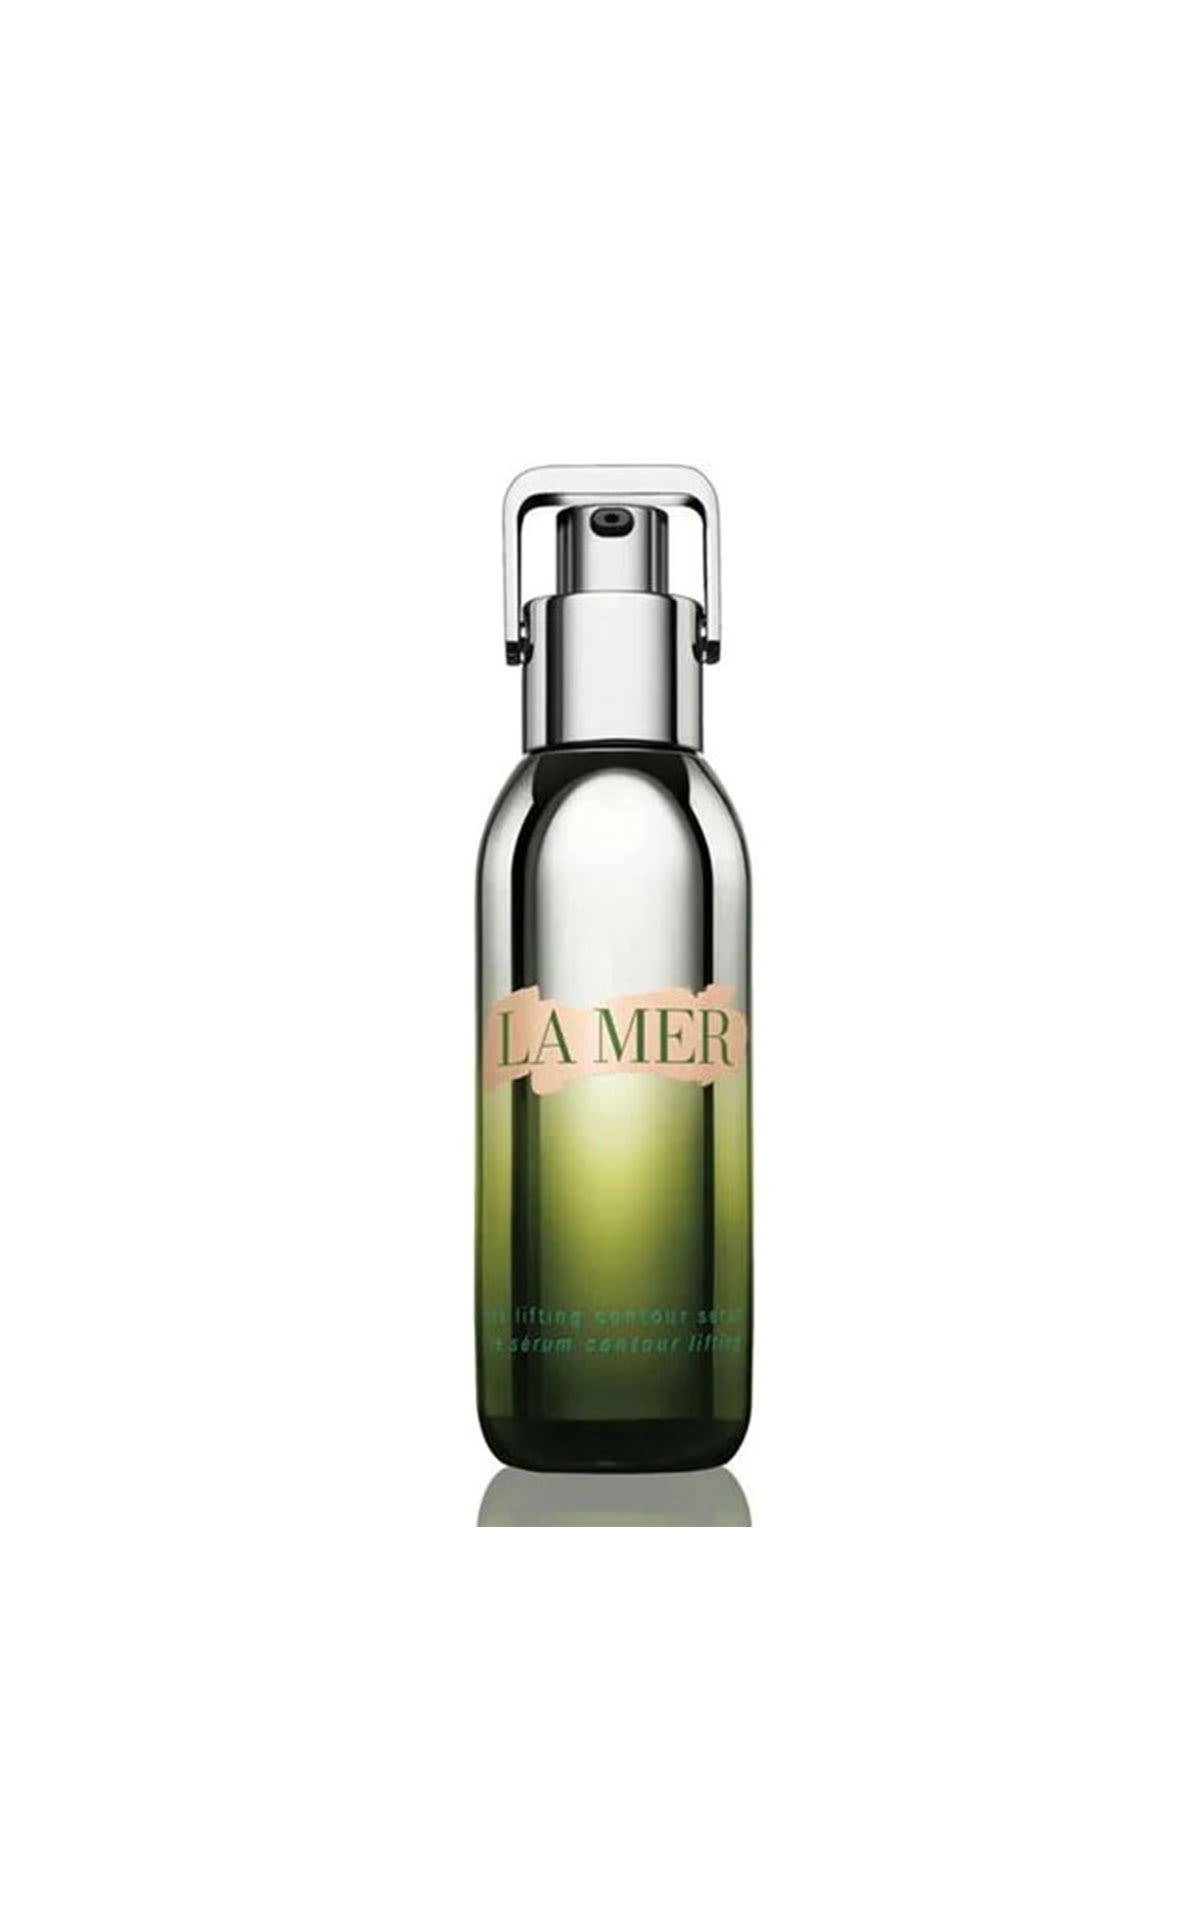 The Cosmetics Company Store La Mer The lifting contour serum 30ml from Bicester Village